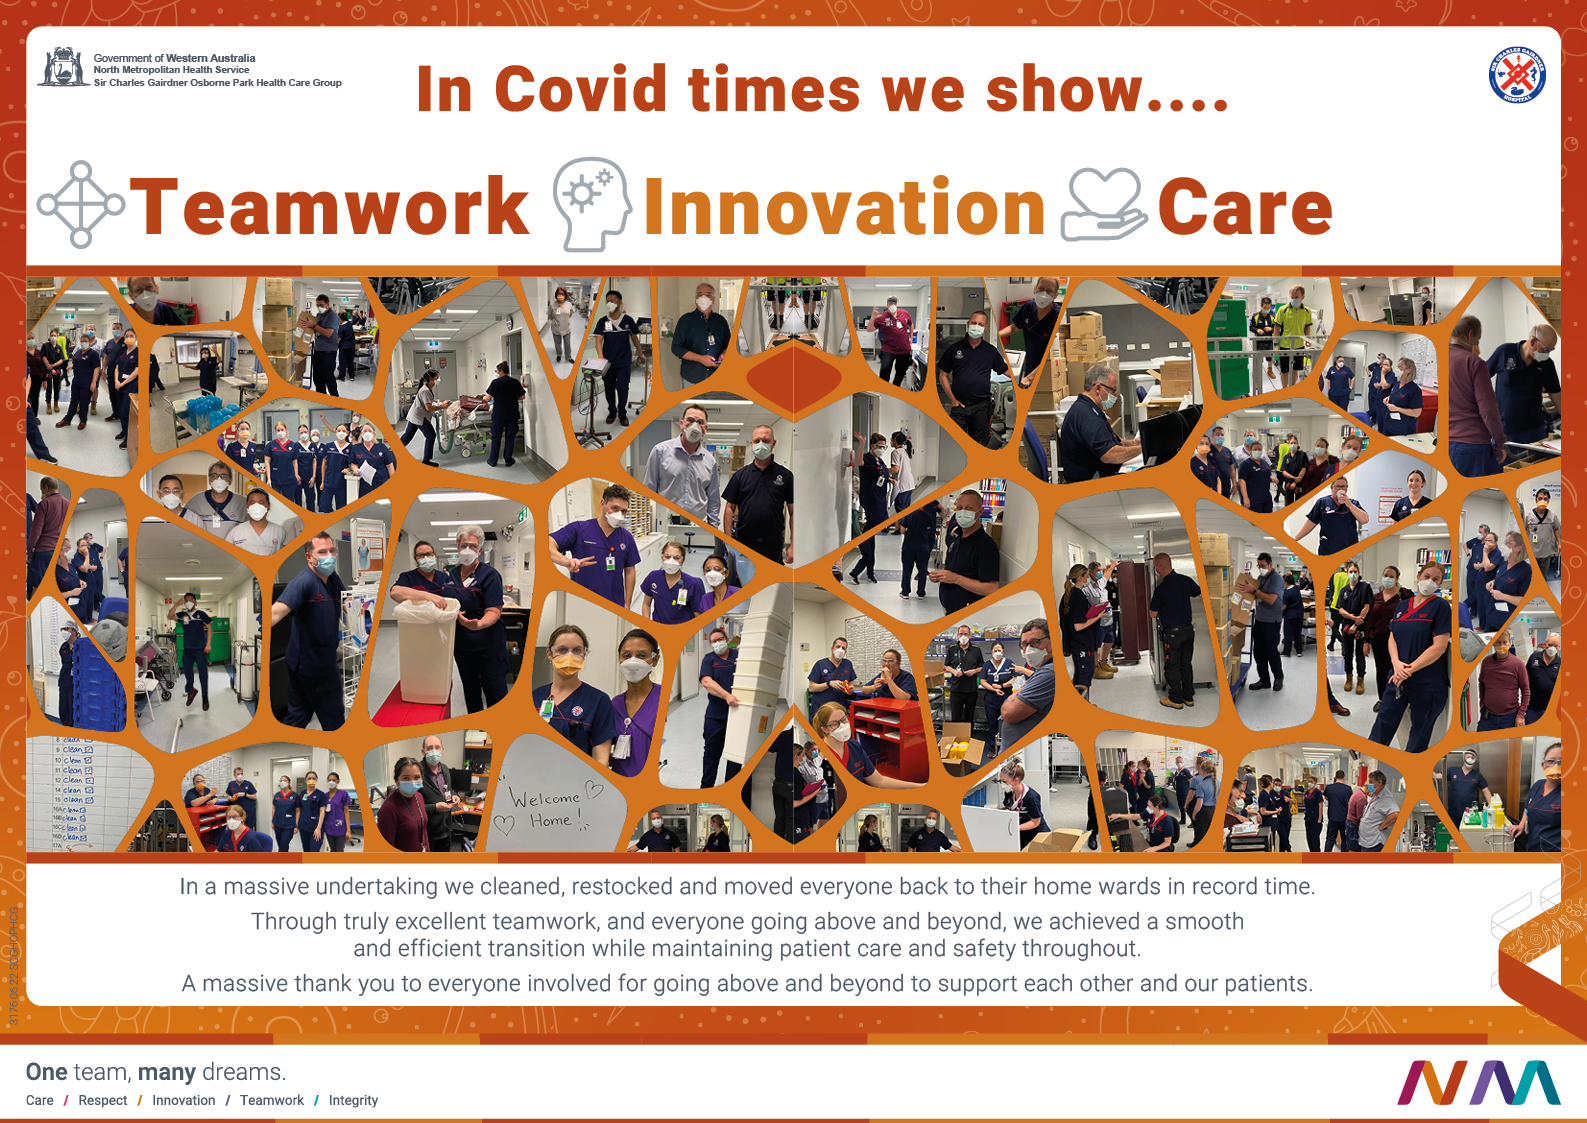 In Covid times we show.... Teamwork, Innovation, Care